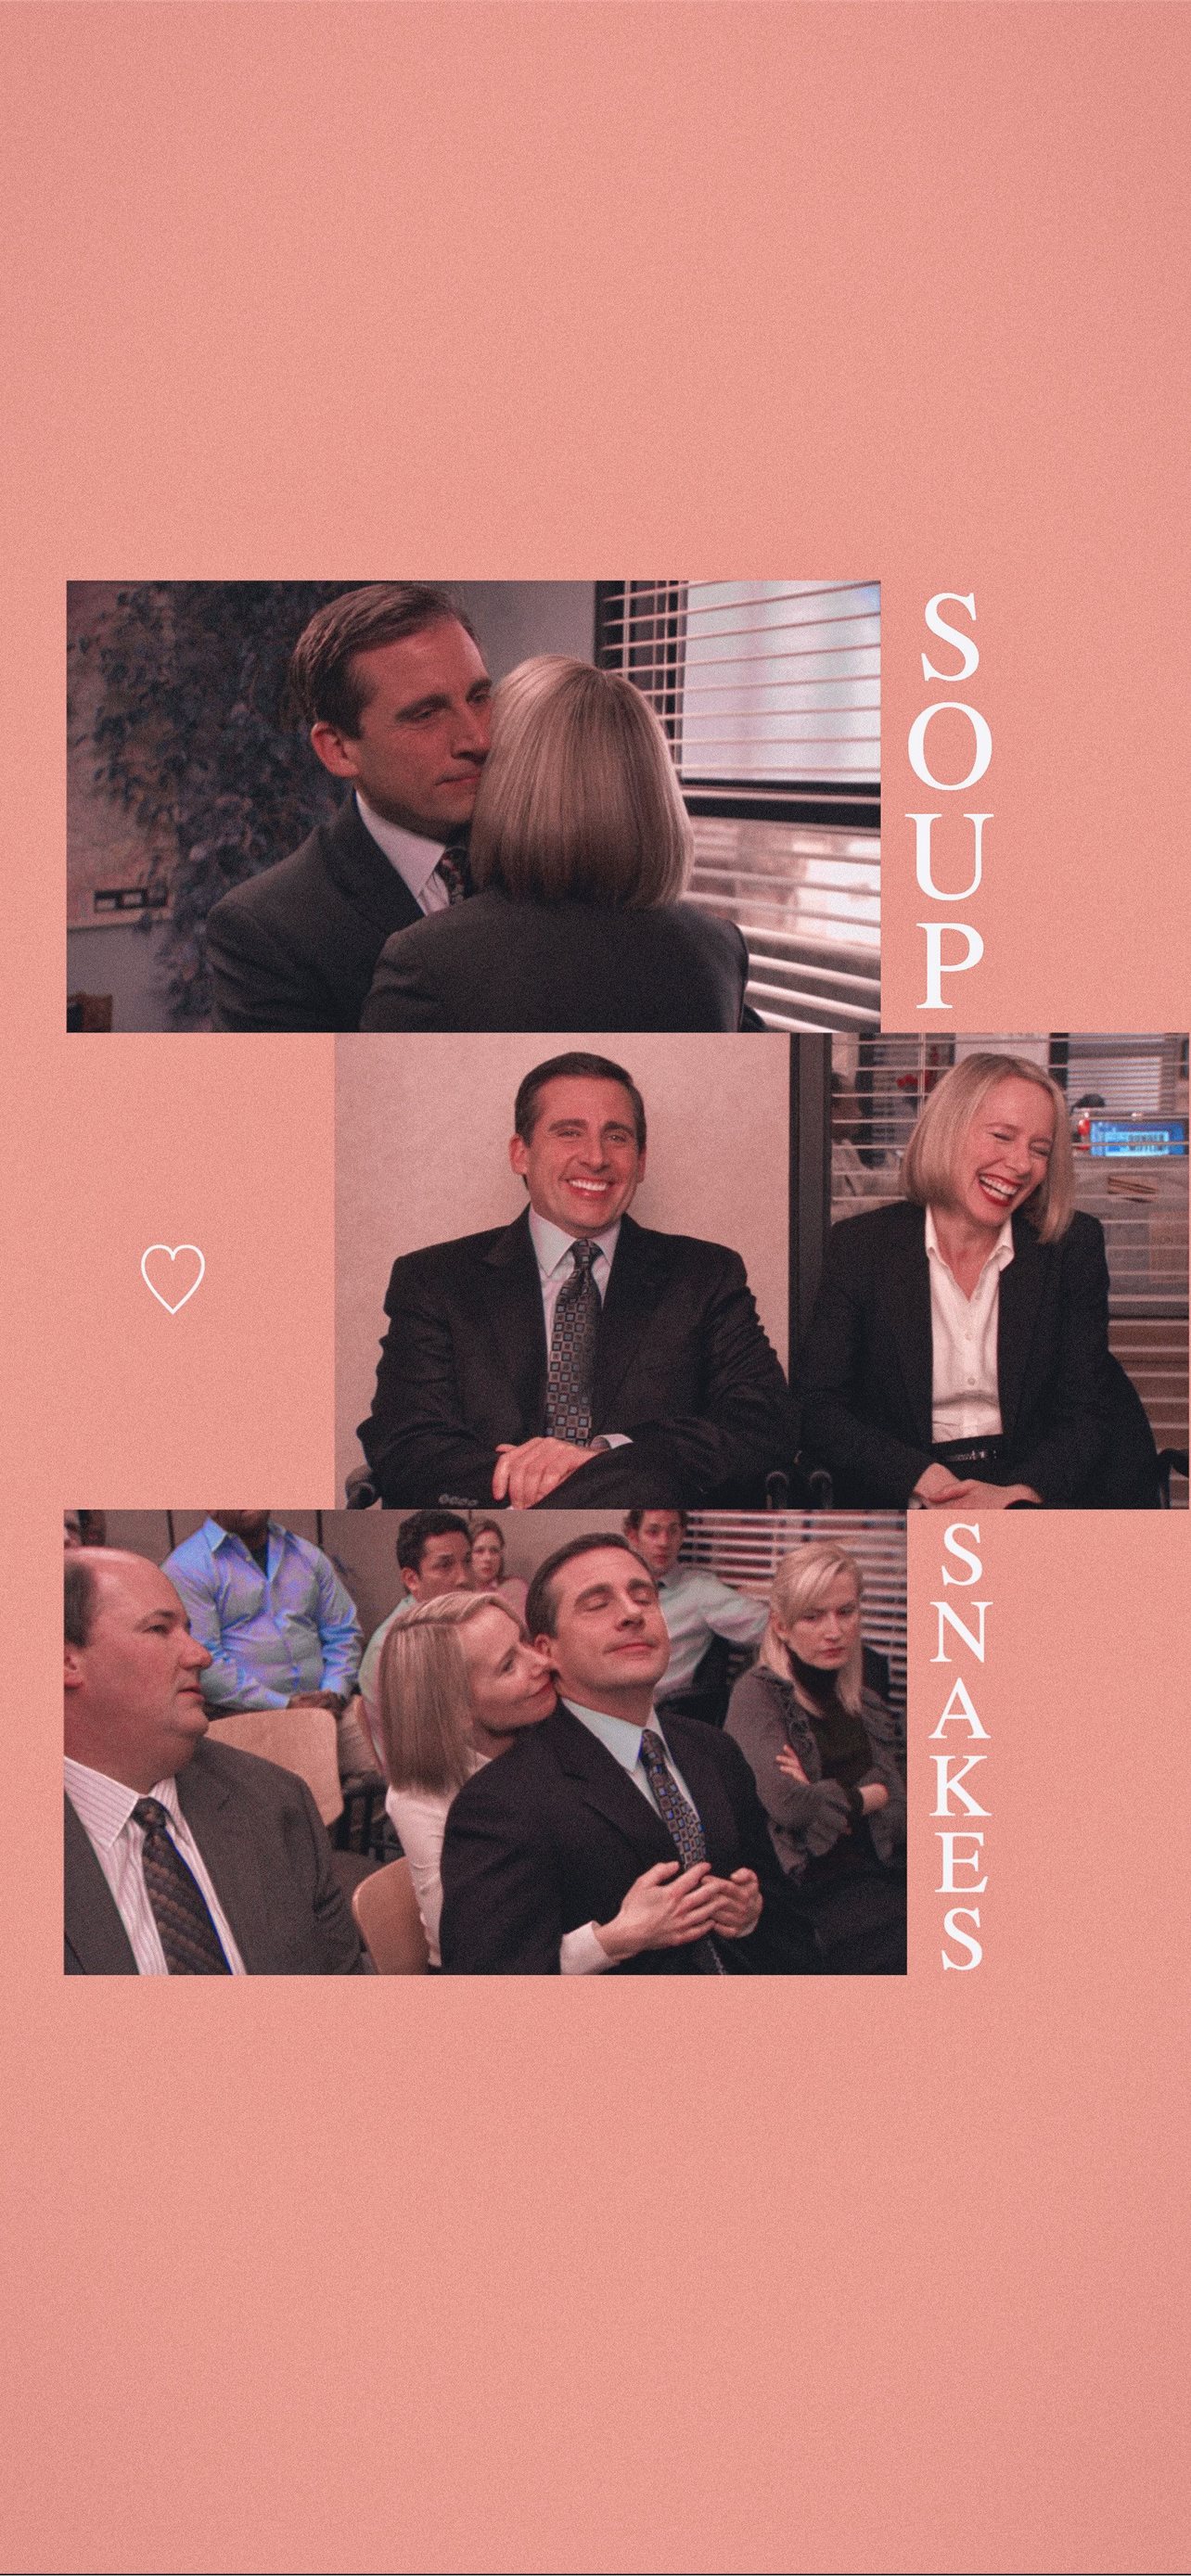 The office iPhone wallpaper 